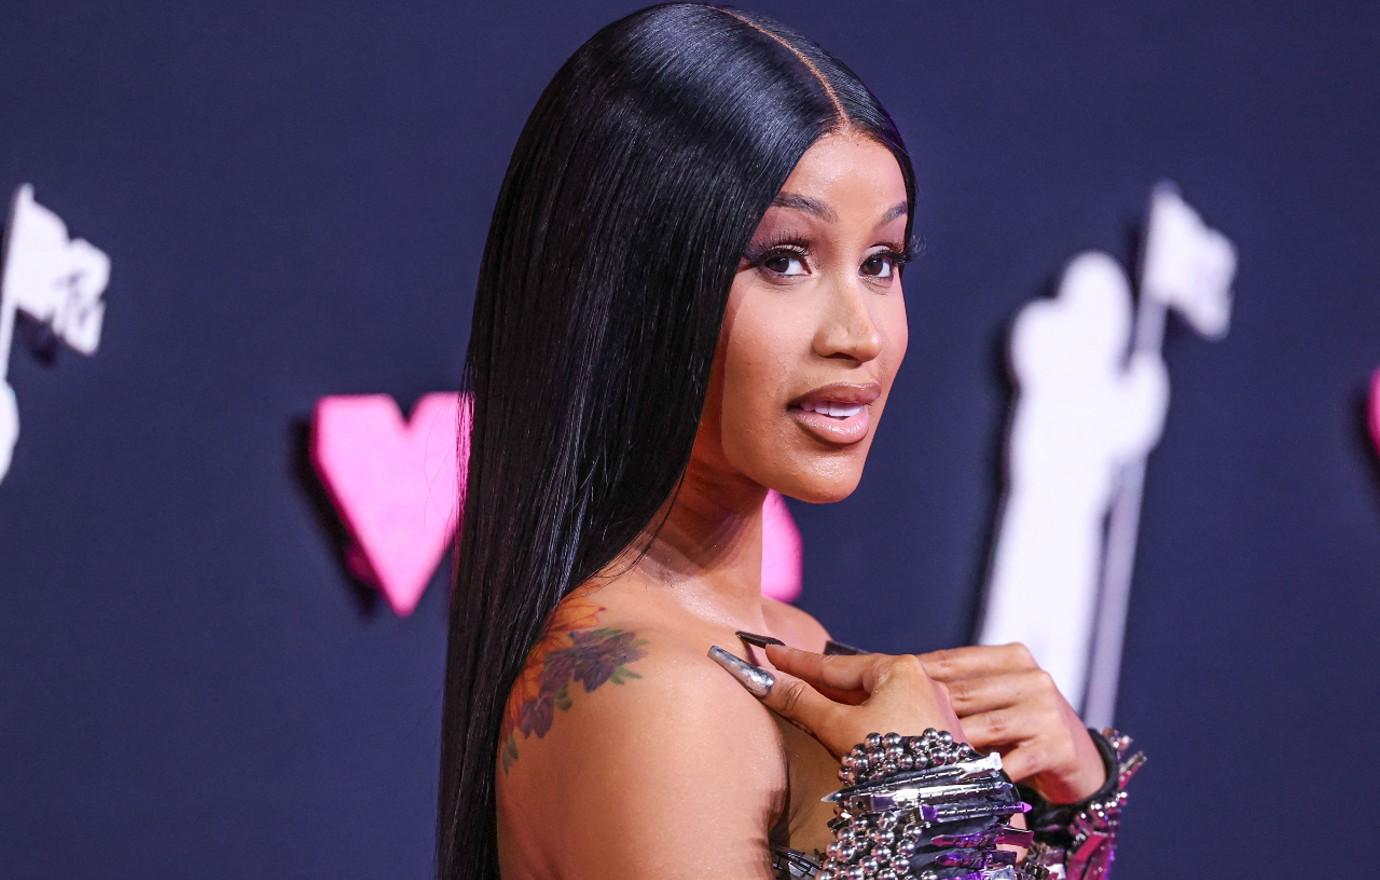 Cardi B breaks down in tears, slams ex Offset for 'doing her dirty after so  many years' in angry Instagram Live rant